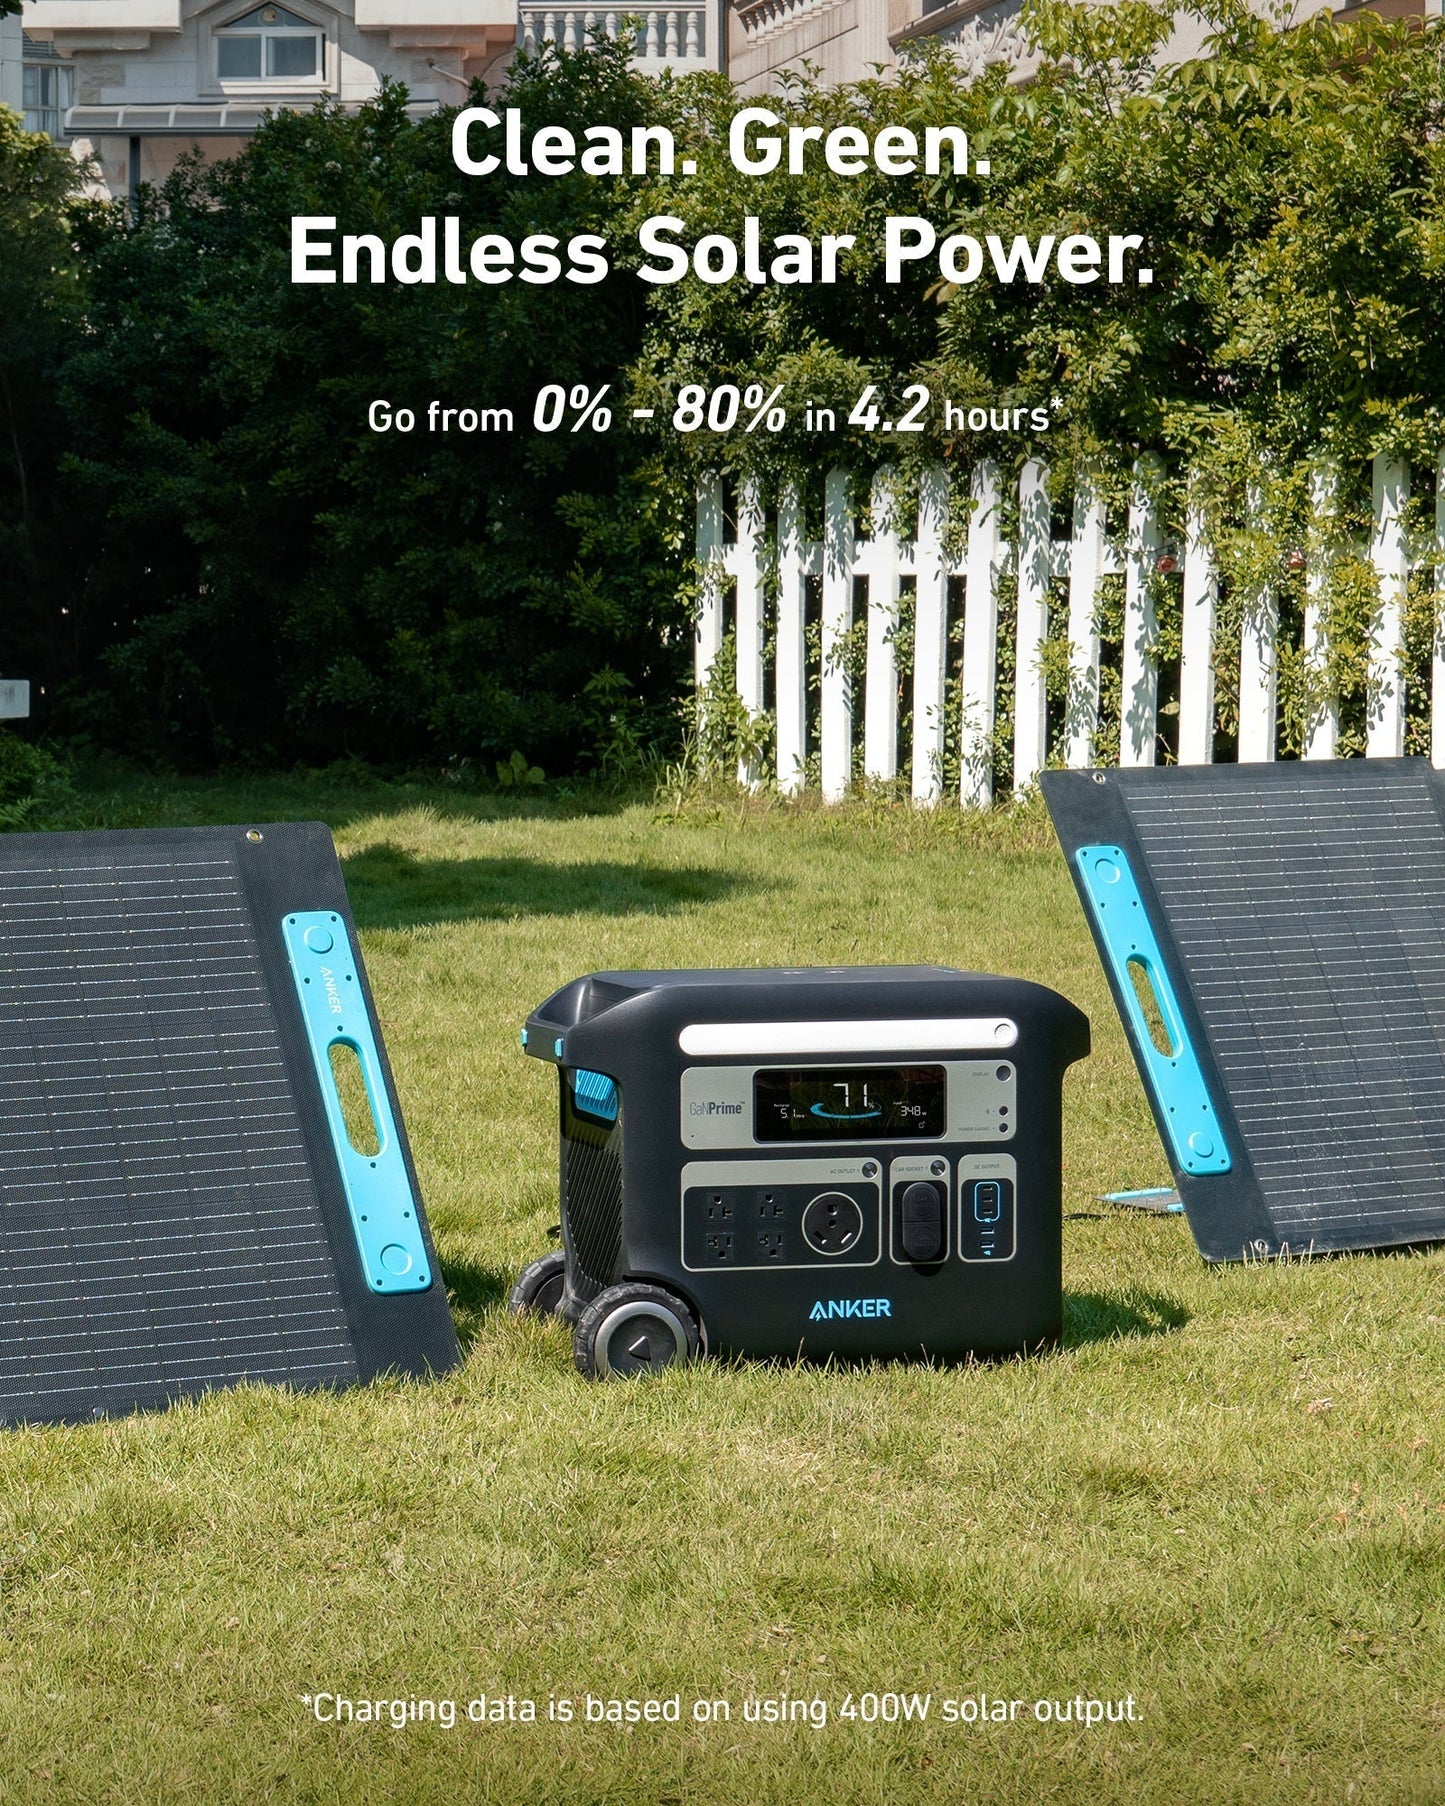 Clean, Green. Endless Solar Power. Go from 0% - 80% in 4.2 hours